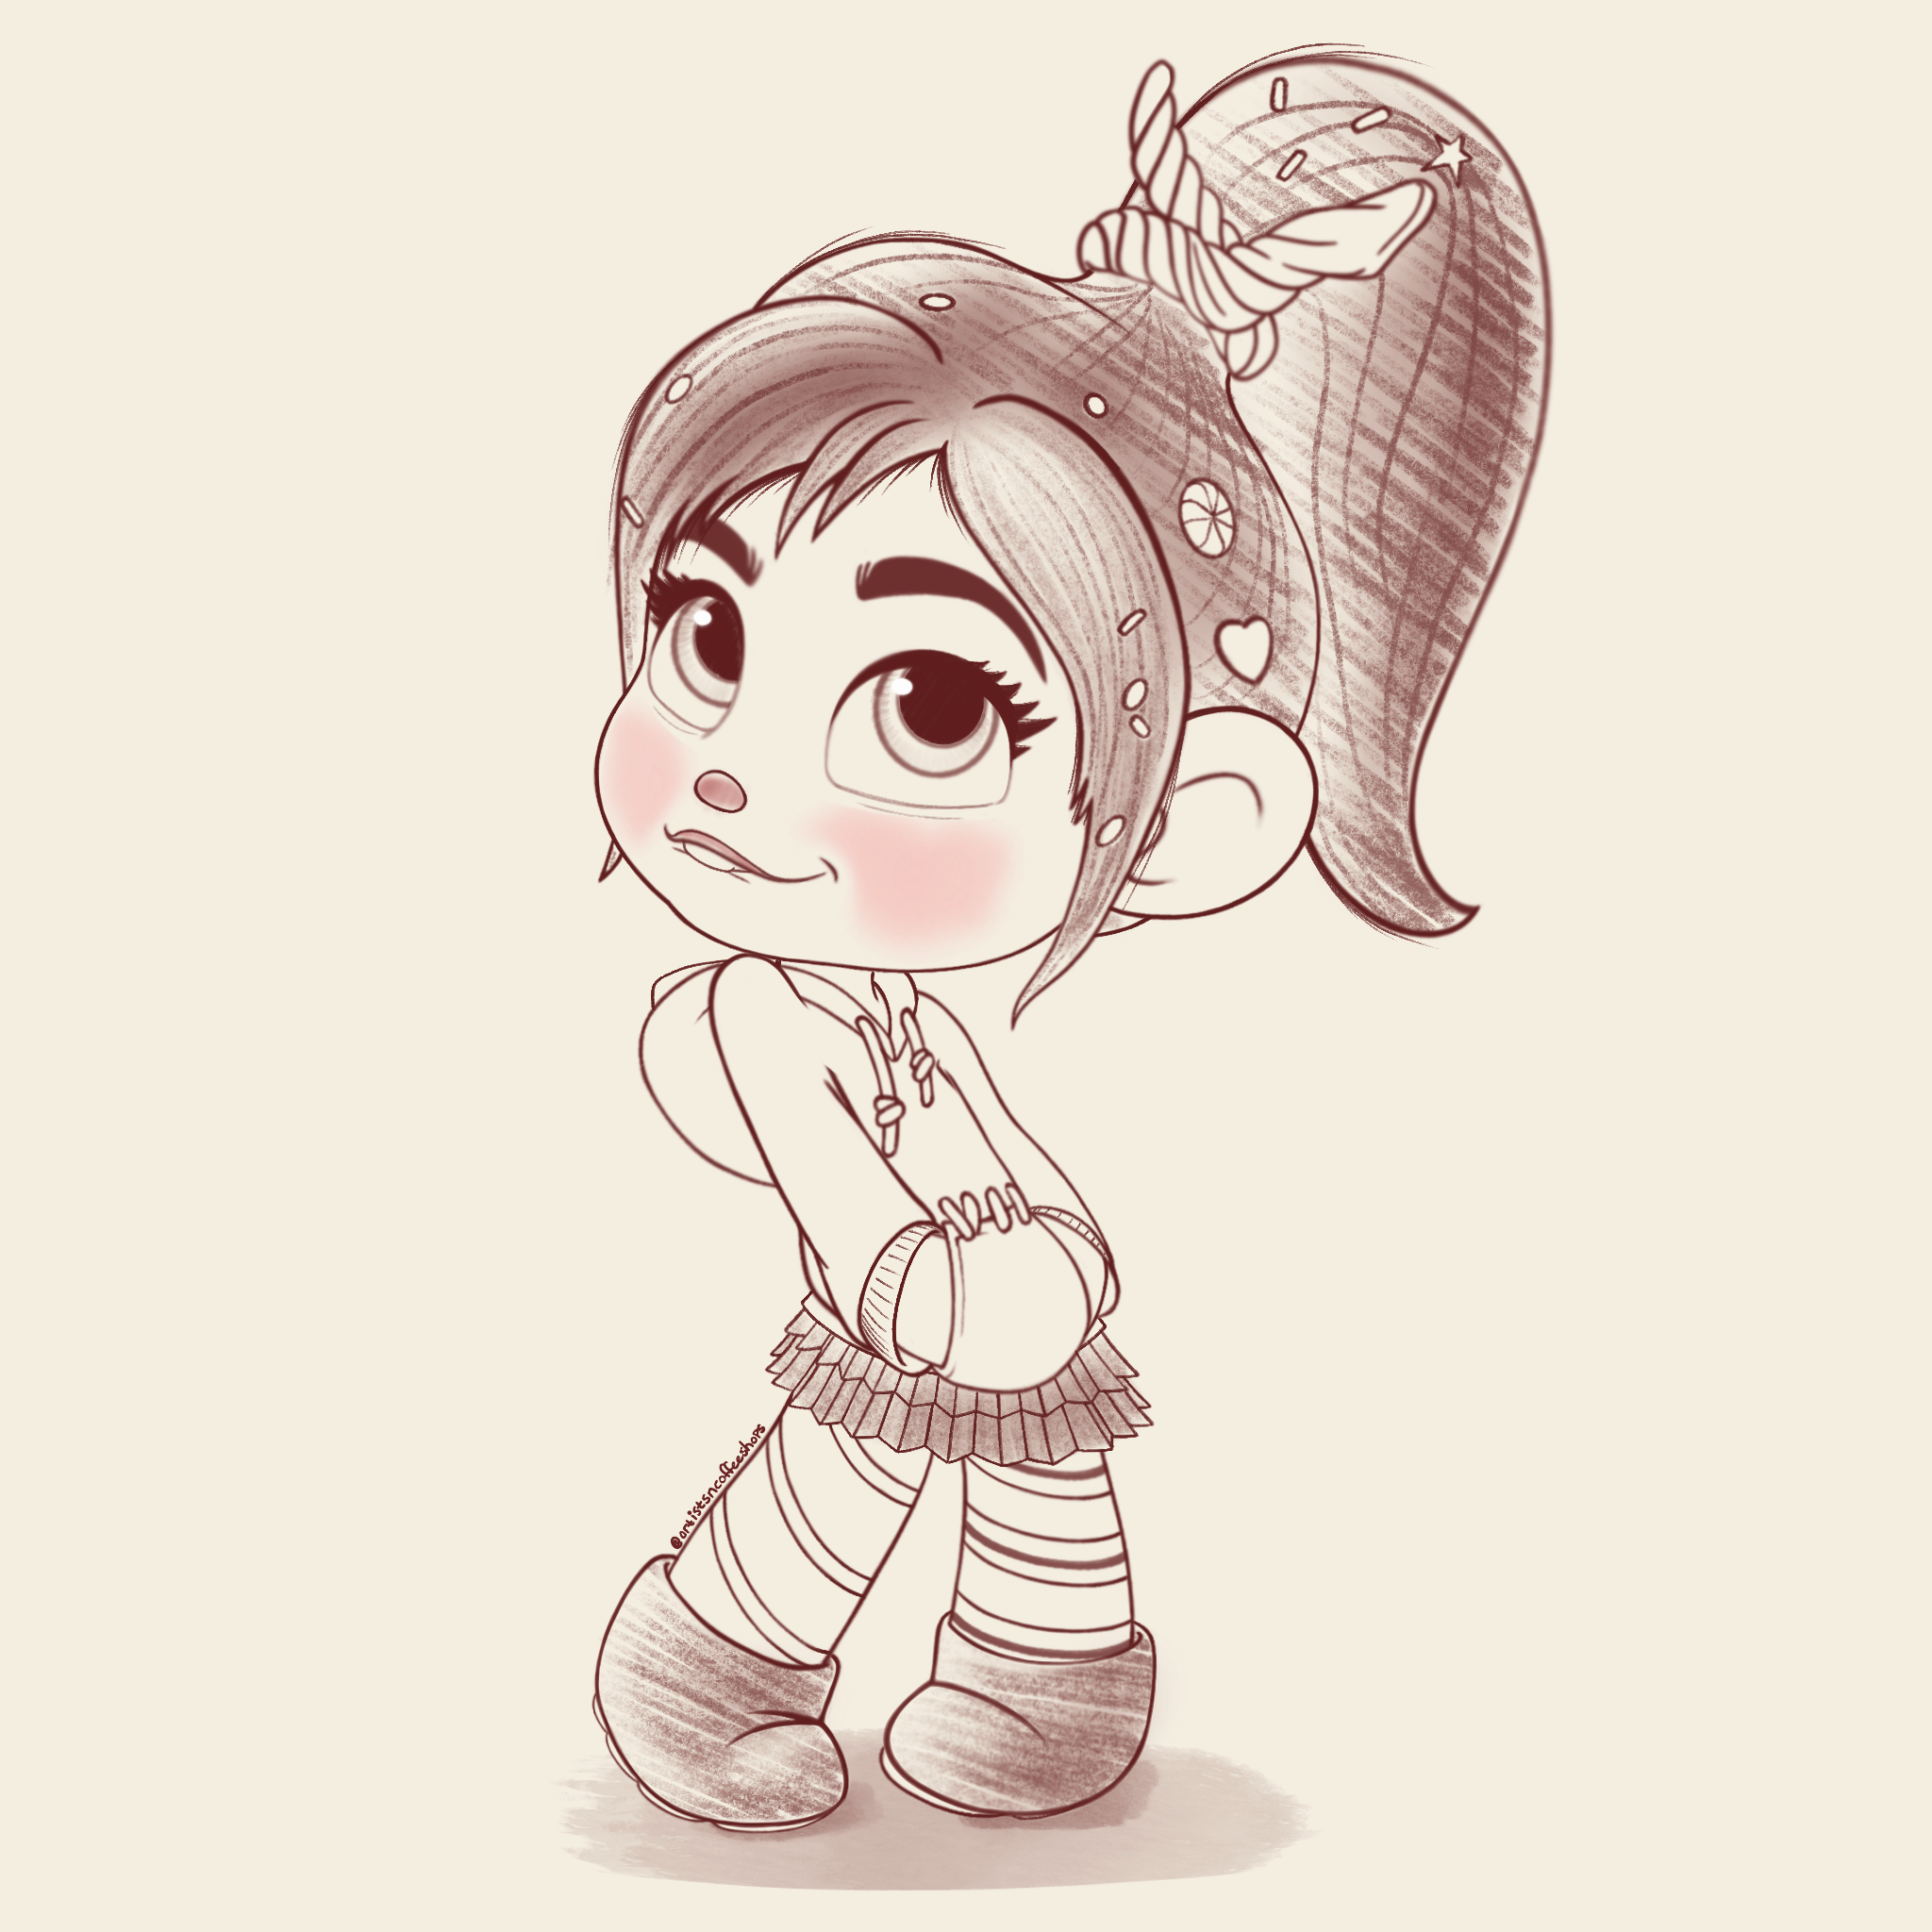 Vanellope - Cute and Sketchy WIP by artistsncoffeeshops on DeviantArt